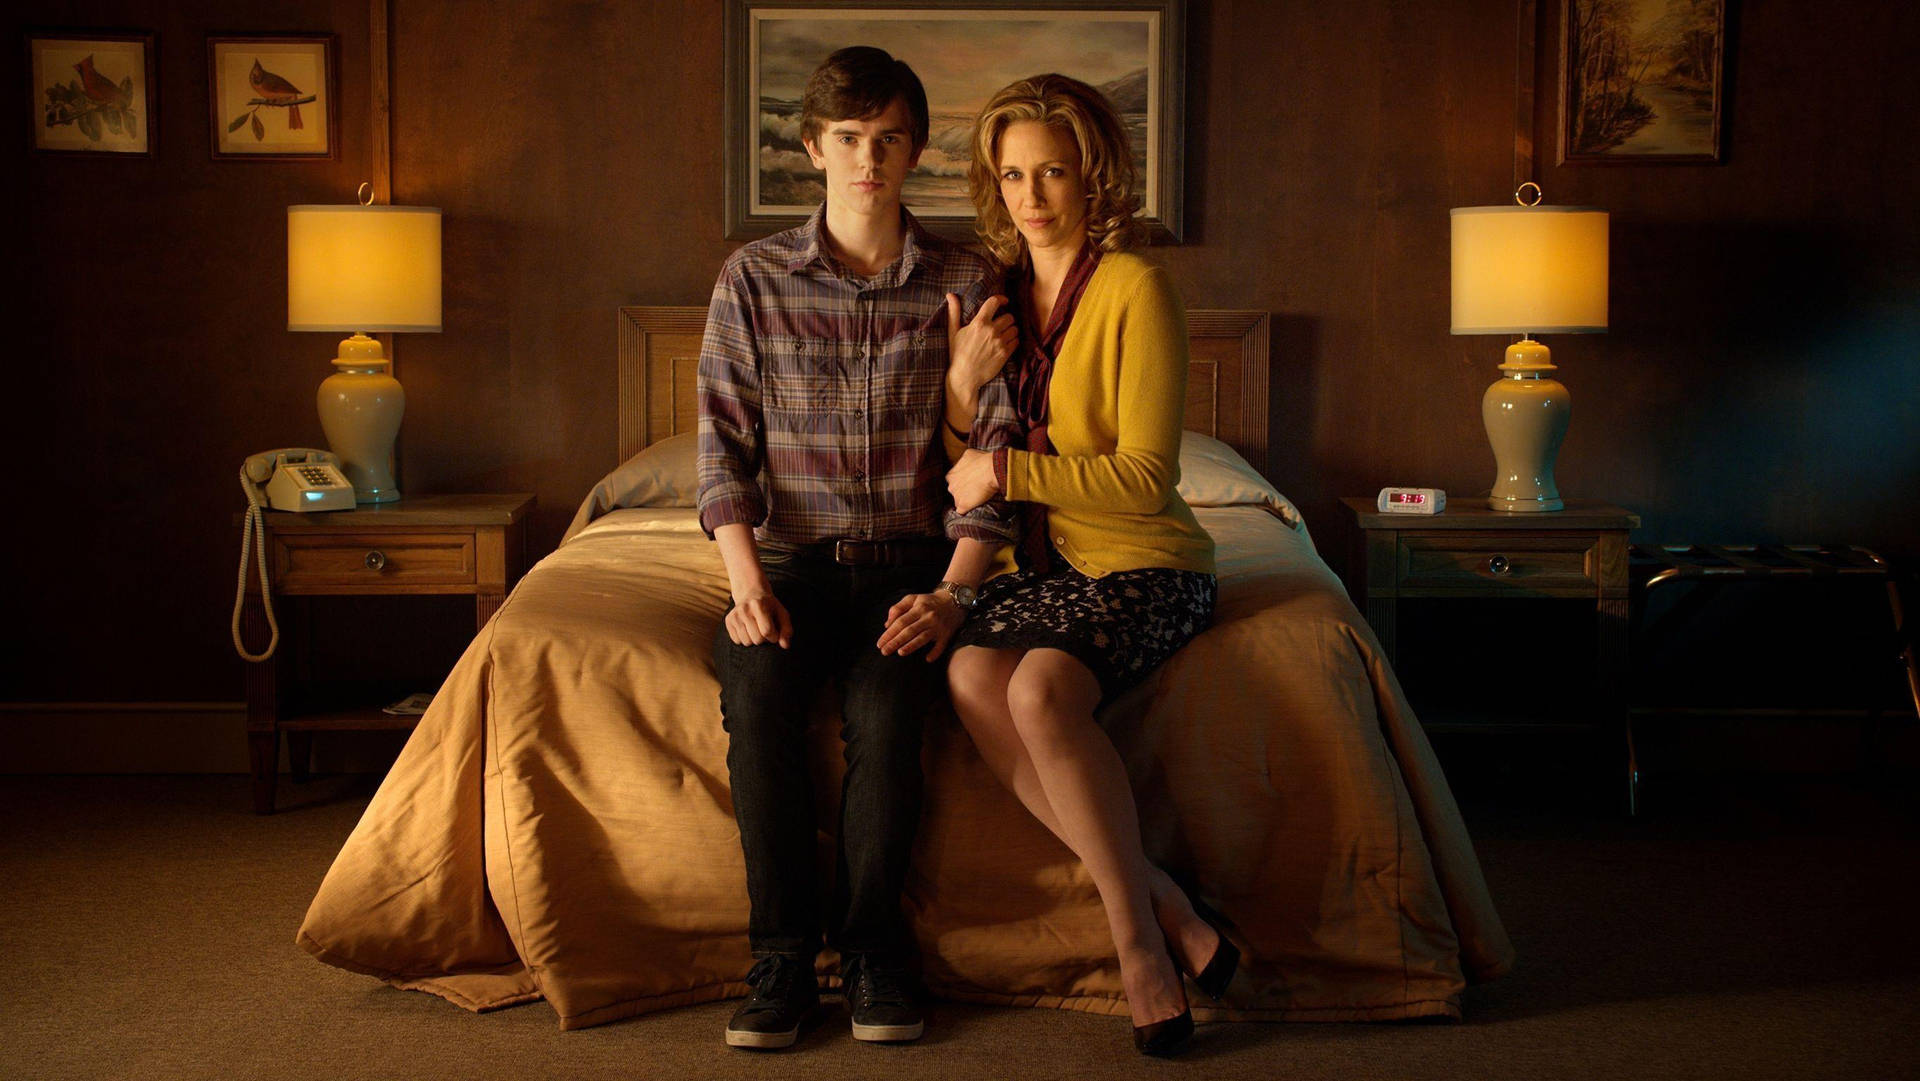 TV Series Bates Motel Bedroom With Norma And Norman Wallpaper